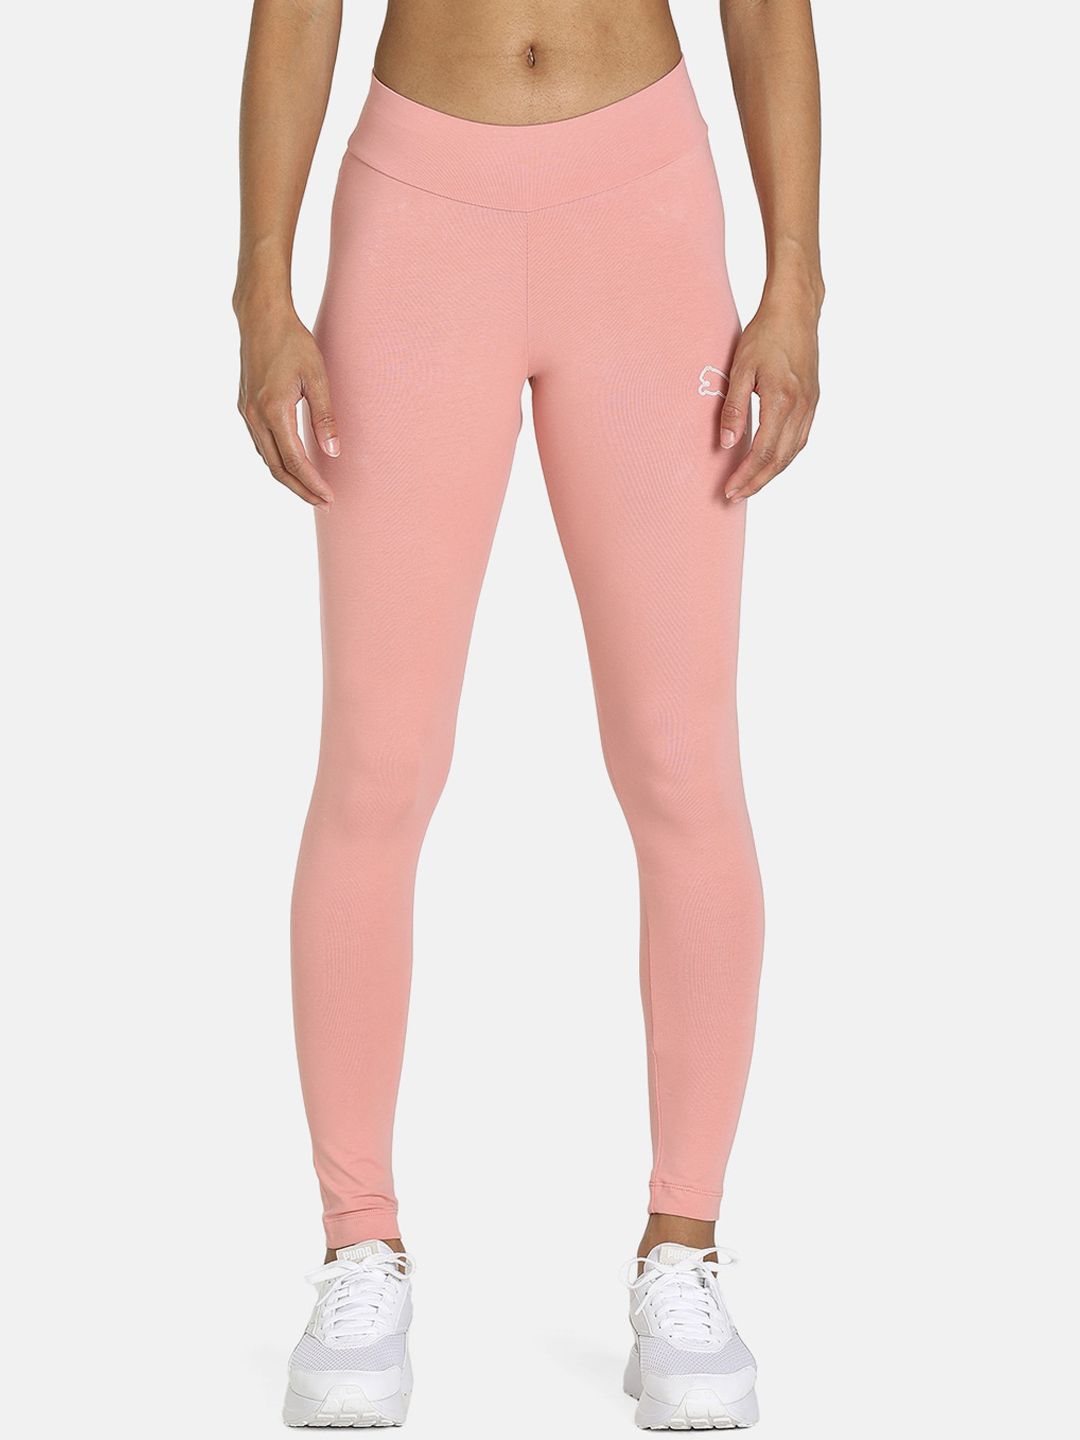 Puma Women Pink Graphic Tights Price in India